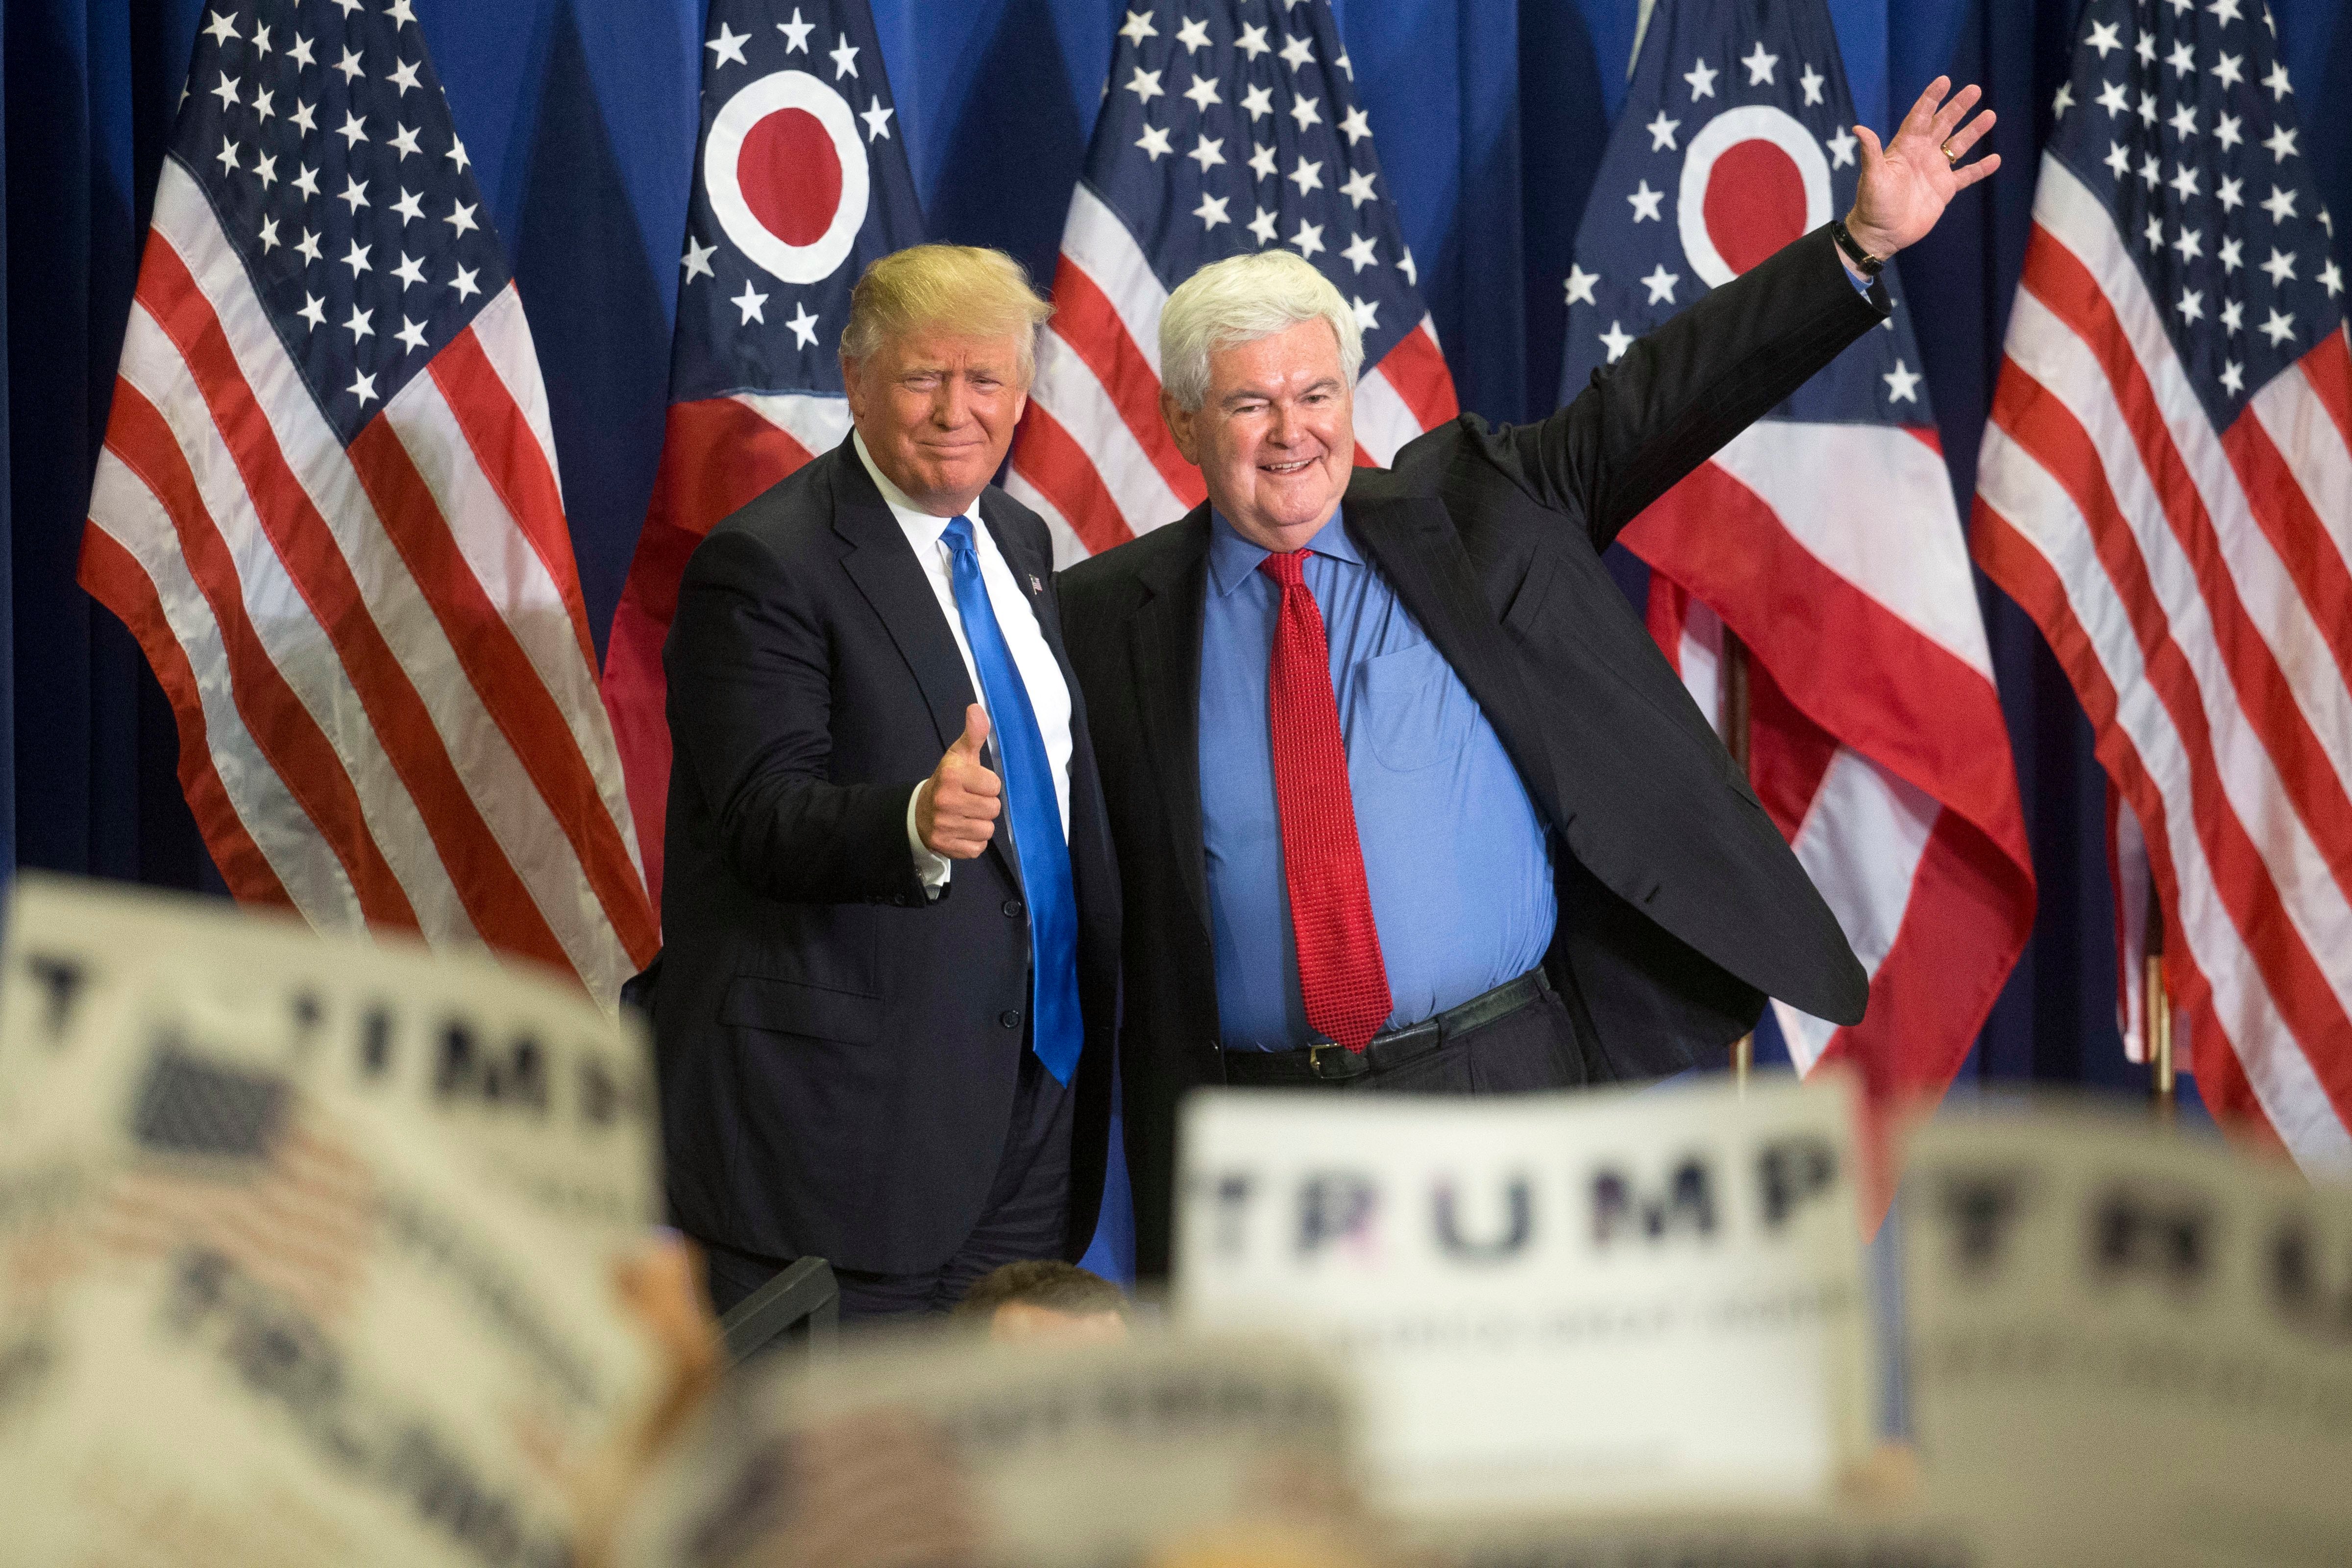 Republican presidential candidate Donald Trump, left, and former House Speaker Newt Gingrich, right, acknowledge the crowd during a campaign rally at the Sharonville Convention Center on July 6, 2016, in Cincinnati. (John Minchillo—AP)